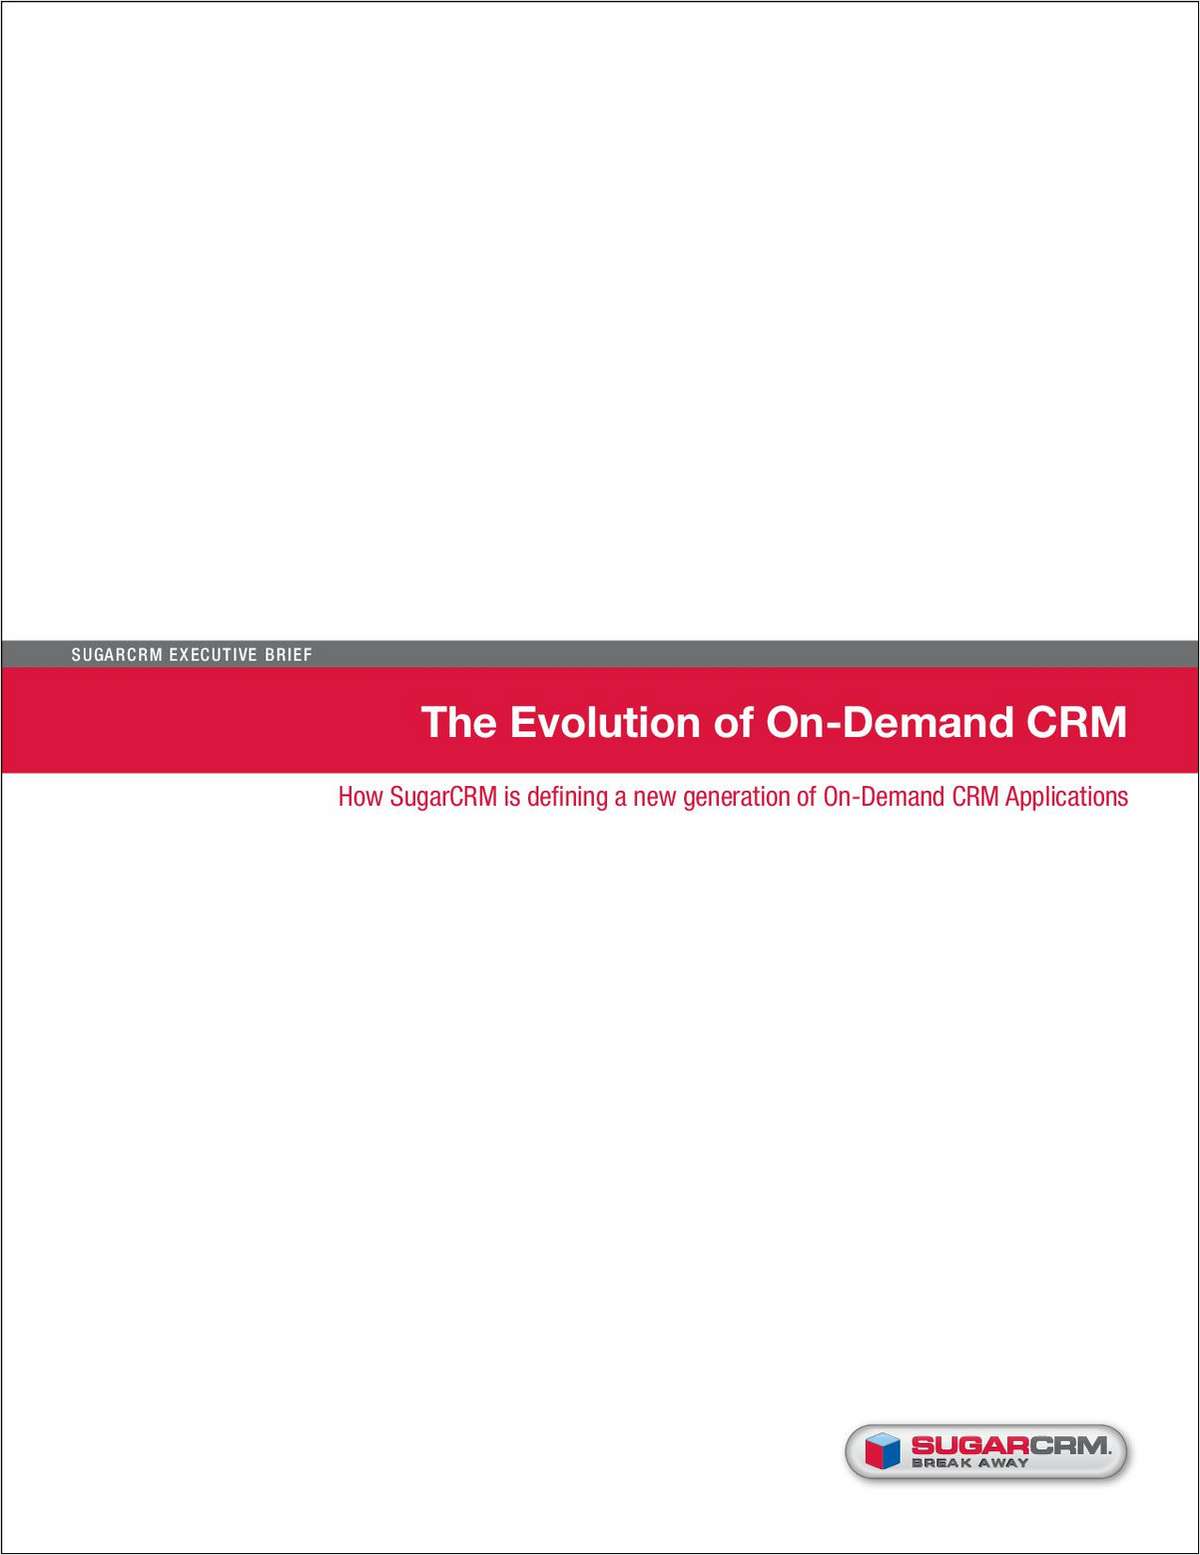 The Evolution of On-Demand CRM - How SugarCRM is defining a new generation of On-Demand CRM Applications